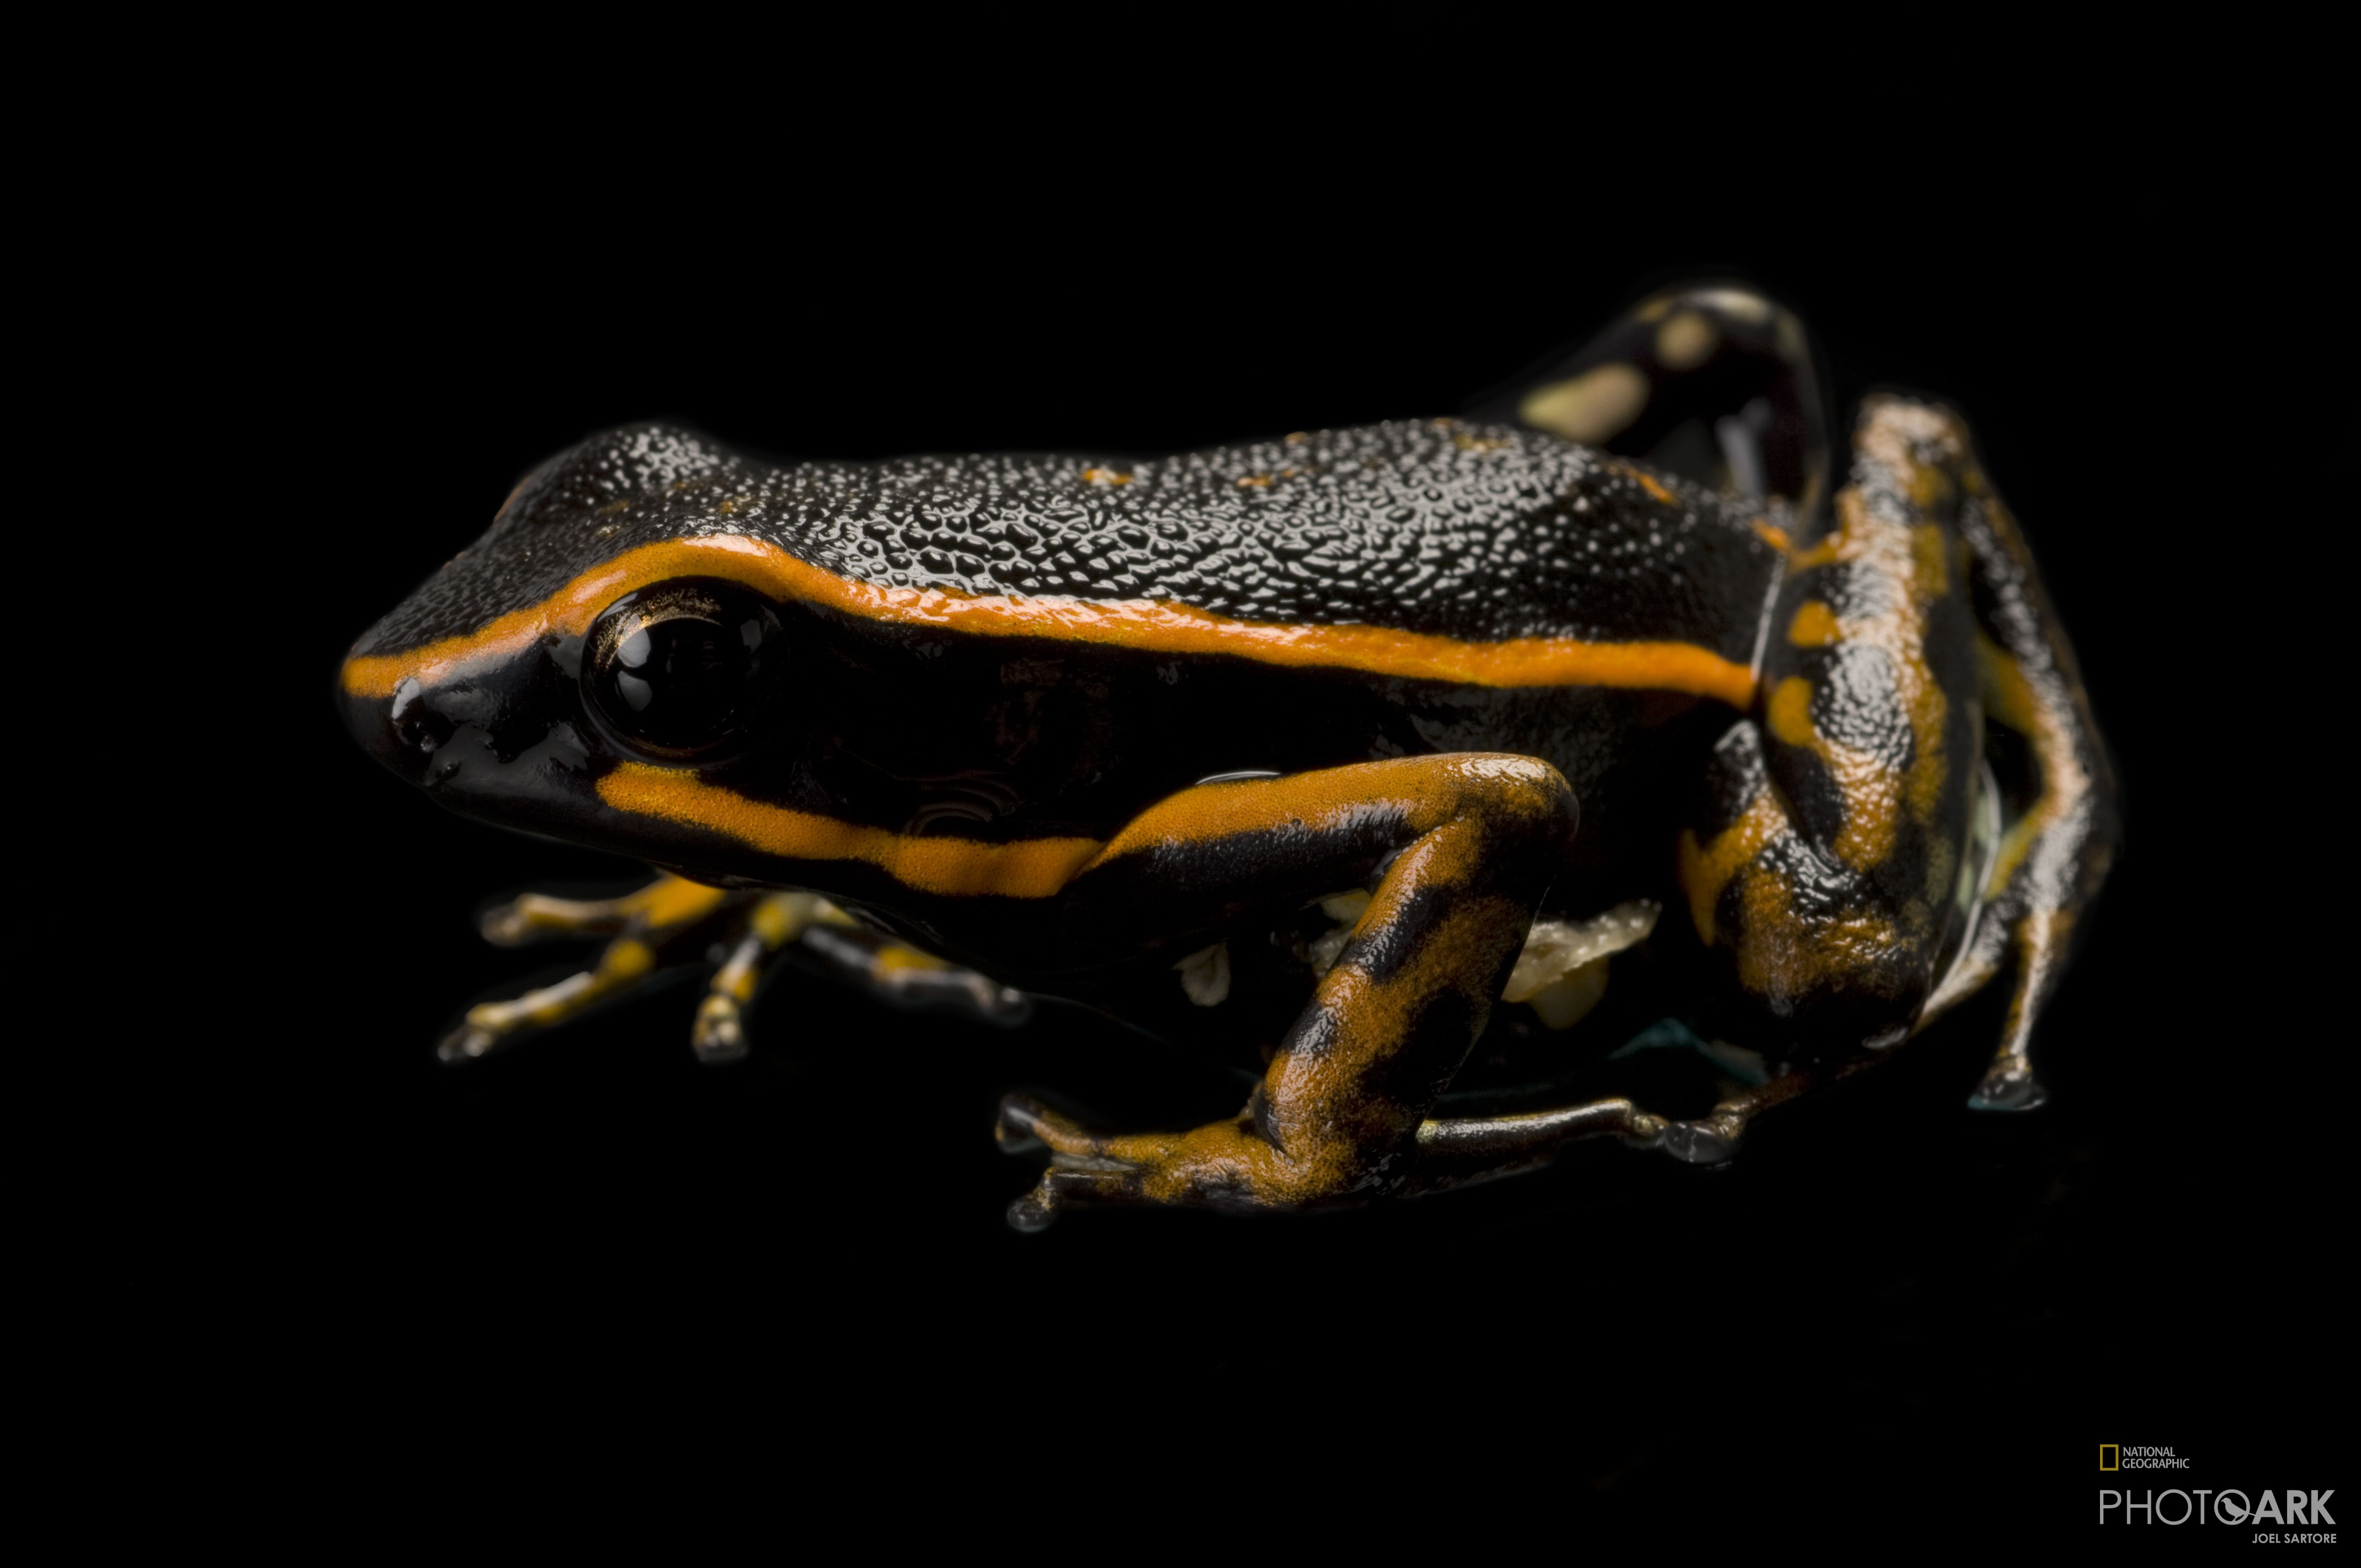 photo-ark-home-three-striped-poison-dart-frog-national-geographic-society